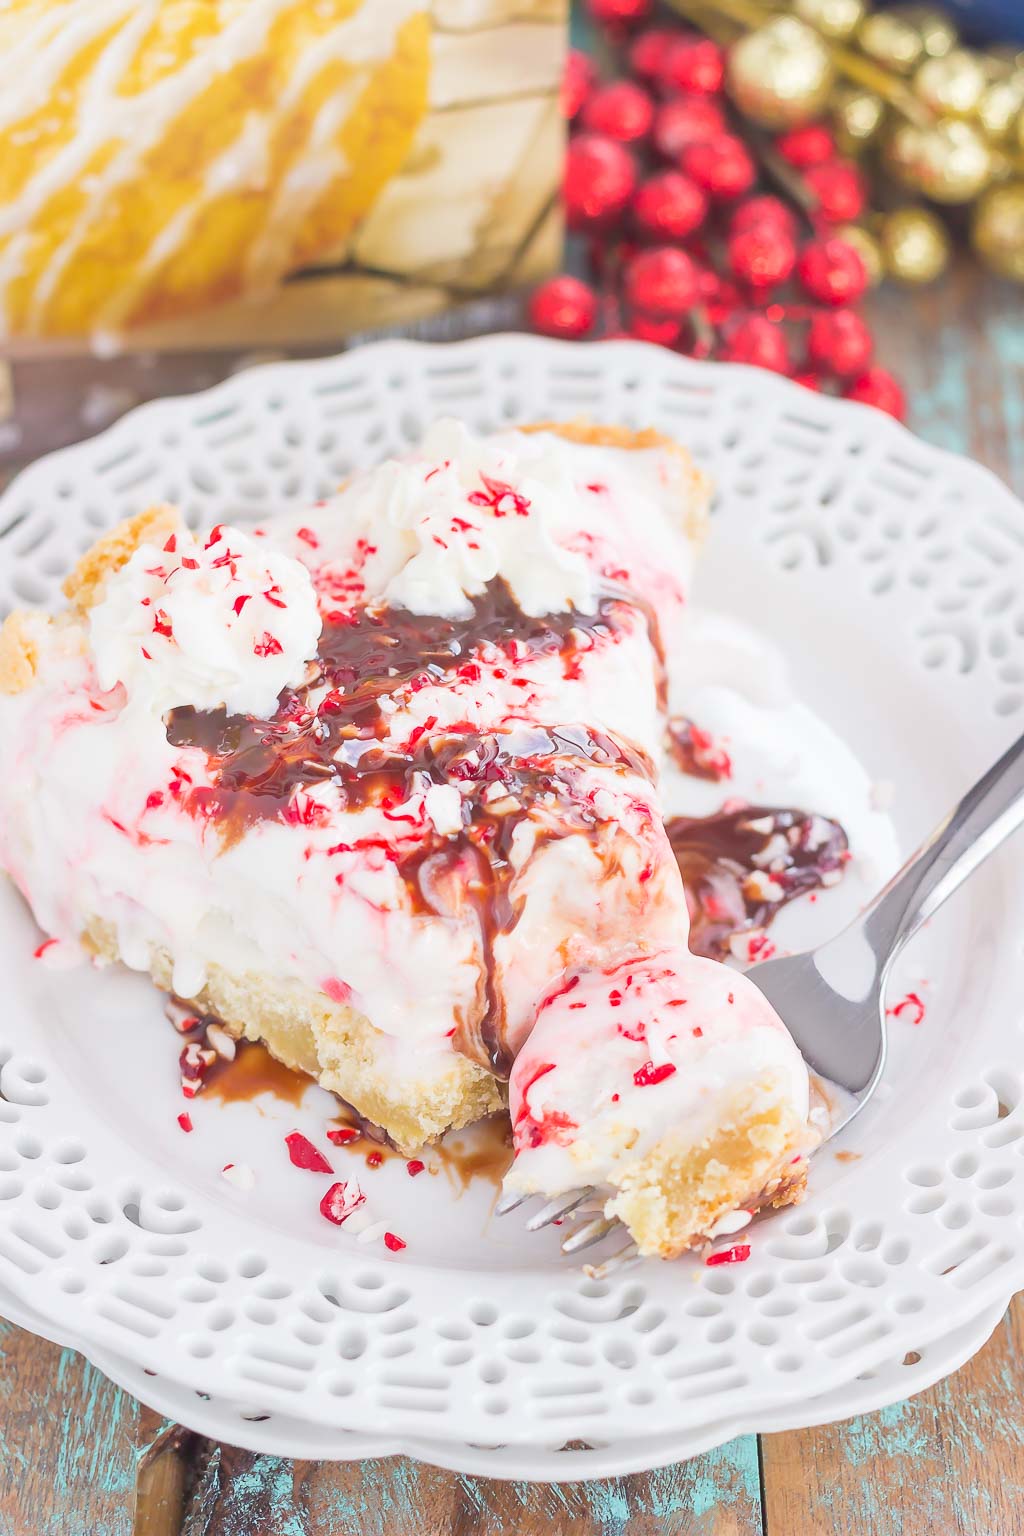 This Peppermint Sugar Cookie Ice Cream Pie is an easy dessert that's full of holiday flavors. A buttery sugar cookie crust envelopes creamy peppermint ice cream and is topped with crushed candy canes. It's a simple dessert that is sure to impress everyone this holiday season!